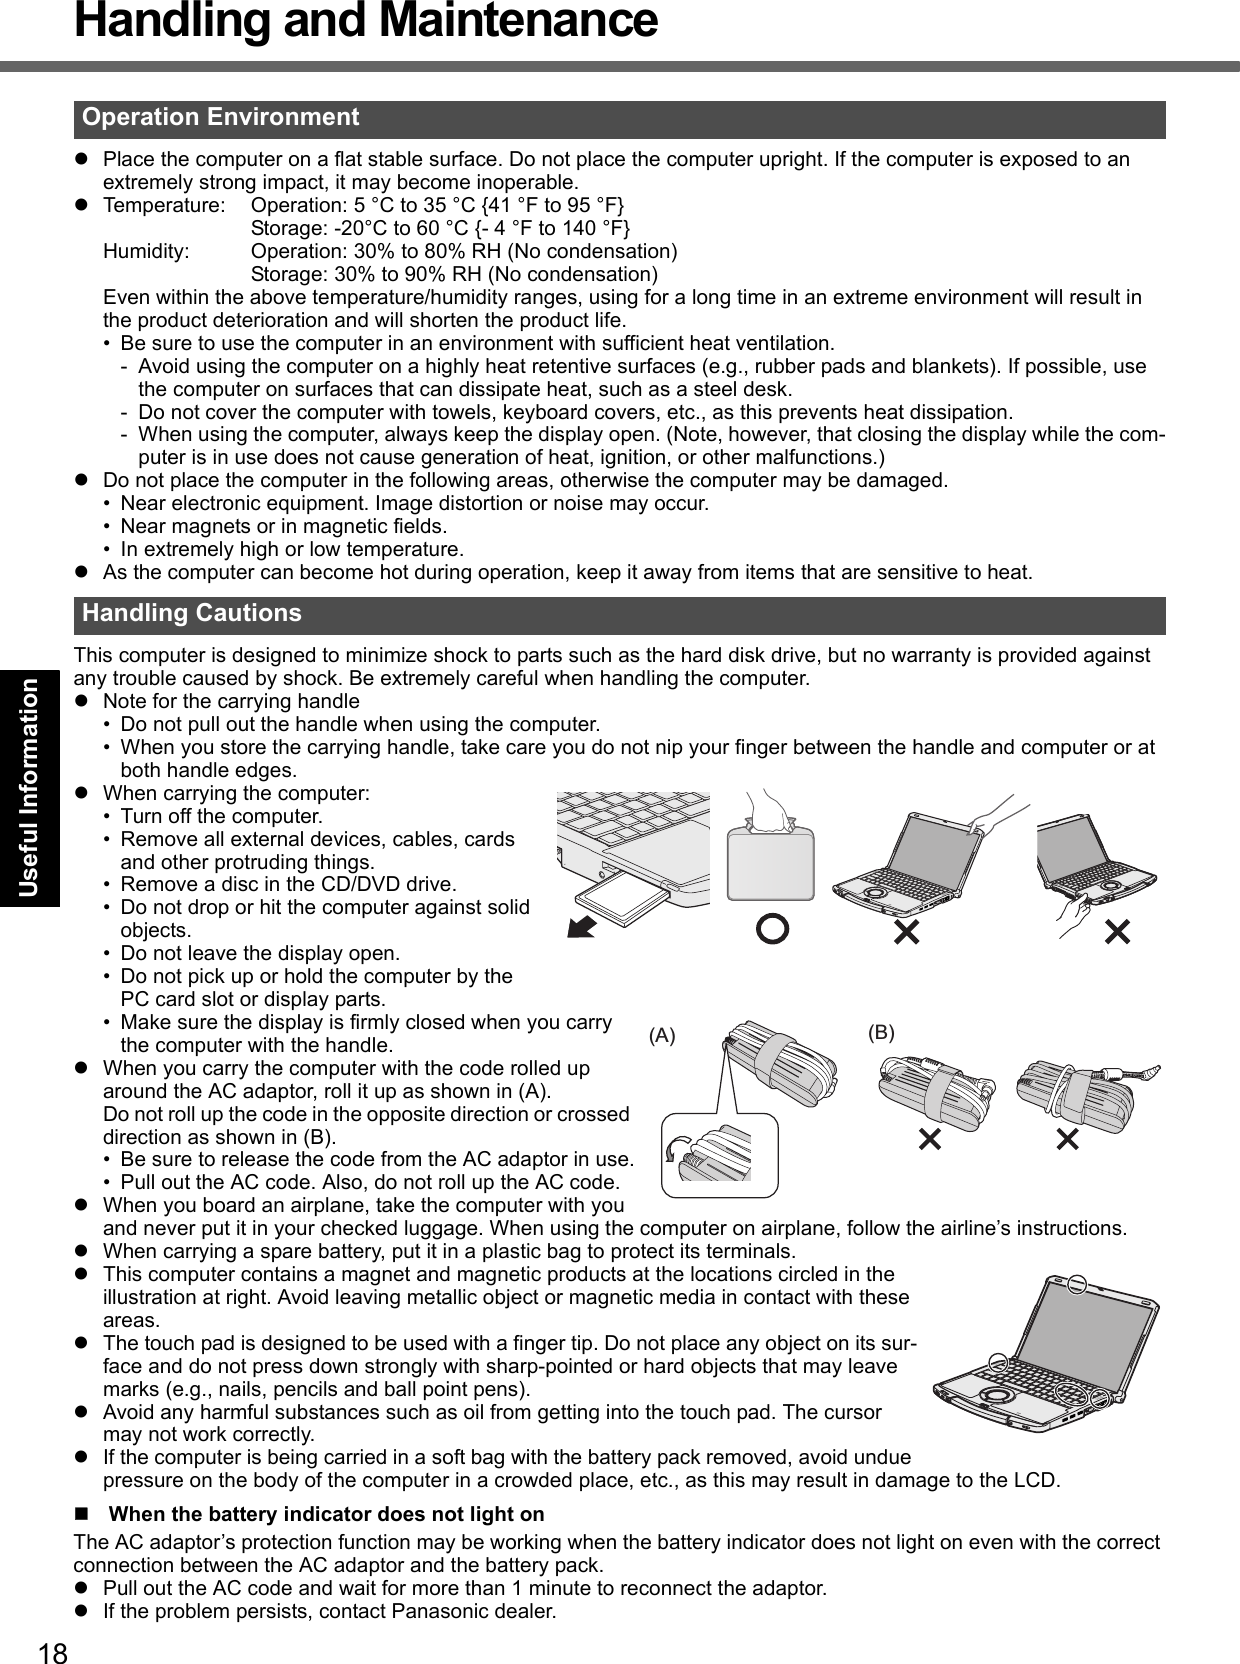 18Getting StartedUseful InformationTroubleshootingAppendixHandling and MaintenancePlace the computer on a flat stable surface. Do not place the computer upright. If the computer is exposed to an extremely strong impact, it may become inoperable.Temperature: Operation: 5 °C to 35 °C {41 °F to 95 °F}Storage: -20°C to 60 °C {- 4 °F to 140 °F}Humidity: Operation: 30% to 80% RH (No condensation)Storage: 30% to 90% RH (No condensation)Even within the above temperature/humidity ranges, using for a long time in an extreme environment will result in the product deterioration and will shorten the product life.• Be sure to use the computer in an environment with sufficient heat ventilation.- Avoid using the computer on a highly heat retentive surfaces (e.g., rubber pads and blankets). If possible, use the computer on surfaces that can dissipate heat, such as a steel desk.- Do not cover the computer with towels, keyboard covers, etc., as this prevents heat dissipation.- When using the computer, always keep the display open. (Note, however, that closing the display while the com-puter is in use does not cause generation of heat, ignition, or other malfunctions.)Do not place the computer in the following areas, otherwise the computer may be damaged.• Near electronic equipment. Image distortion or noise may occur.• Near magnets or in magnetic fields.• In extremely high or low temperature.As the computer can become hot during operation, keep it away from items that are sensitive to heat.This computer is designed to minimize shock to parts such as the hard disk drive, but no warranty is provided against any trouble caused by shock. Be extremely careful when handling the computer.Note for the carrying handle• Do not pull out the handle when using the computer.• When you store the carrying handle, take care you do not nip your finger between the handle and computer or at both handle edges.When carrying the computer:• Turn off the computer.• Remove all external devices, cables, cards and other protruding things.• Remove a disc in the CD/DVD drive.• Do not drop or hit the computer against solid objects.• Do not leave the display open.• Do not pick up or hold the computer by the PC card slot or display parts.• Make sure the display is firmly closed when you carry the computer with the handle.When you carry the computer with the code rolled up around the AC adaptor, roll it up as shown in (A).Do not roll up the code in the opposite direction or crossed direction as shown in (B).• Be sure to release the code from the AC adaptor in use.• Pull out the AC code. Also, do not roll up the AC code.When you board an airplane, take the computer with you and never put it in your checked luggage. When using the computer on airplane, follow the airline’s instructions.When carrying a spare battery, put it in a plastic bag to protect its terminals.This computer contains a magnet and magnetic products at the locations circled in the illustration at right. Avoid leaving metallic object or magnetic media in contact with these areas.The touch pad is designed to be used with a finger tip. Do not place any object on its sur-face and do not press down strongly with sharp-pointed or hard objects that may leave marks (e.g., nails, pencils and ball point pens).Avoid any harmful substances such as oil from getting into the touch pad. The cursor may not work correctly.If the computer is being carried in a soft bag with the battery pack removed, avoid undue pressure on the body of the computer in a crowded place, etc., as this may result in damage to the LCD.When the battery indicator does not light onThe AC adaptor’s protection function may be working when the battery indicator does not light on even with the correct connection between the AC adaptor and the battery pack.Pull out the AC code and wait for more than 1 minute to reconnect the adaptor.If the problem persists, contact Panasonic dealer.Operation EnvironmentHandling Cautions(A) (B)